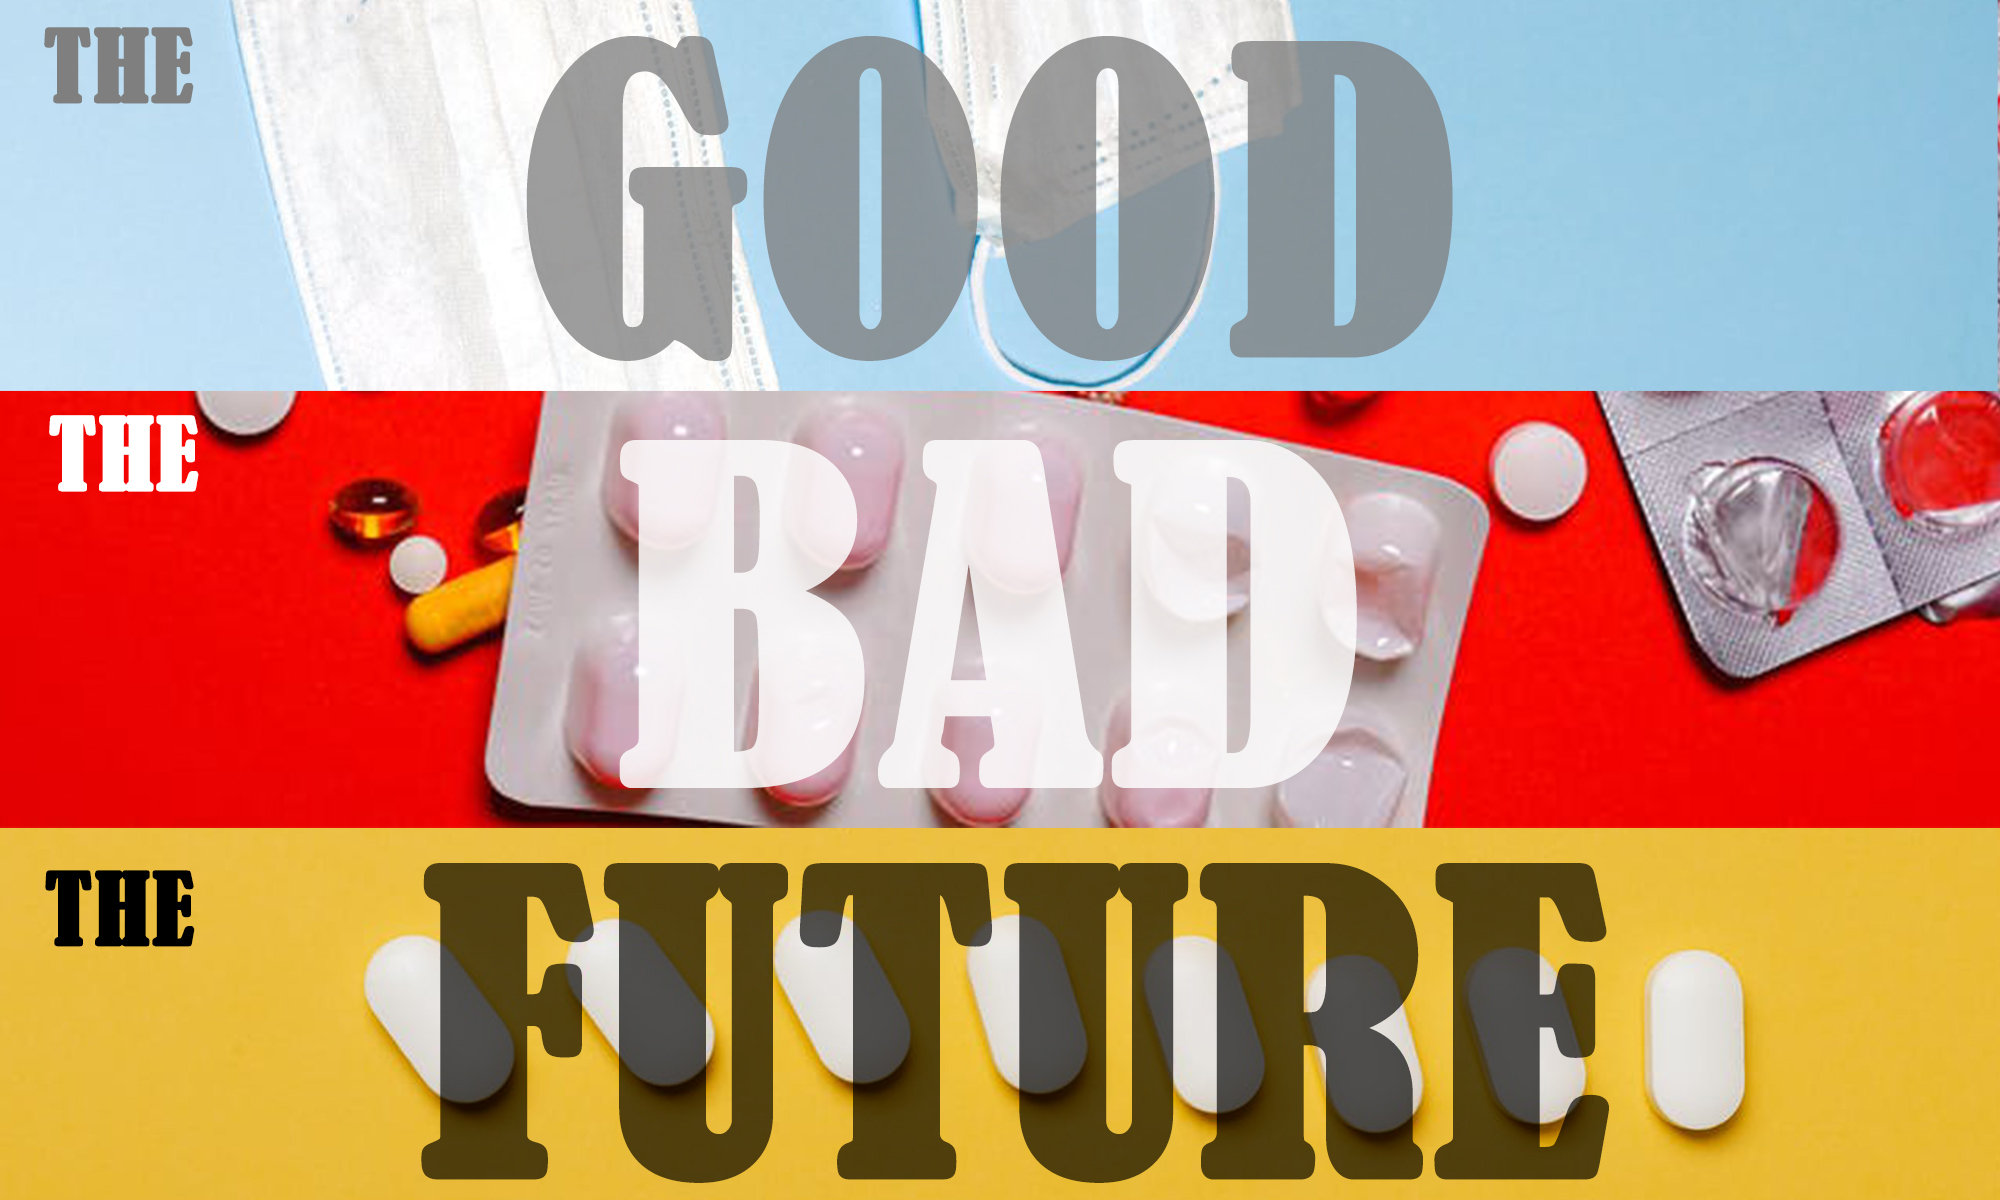 A graphic of three tiered images depicting the good, the bad and the future